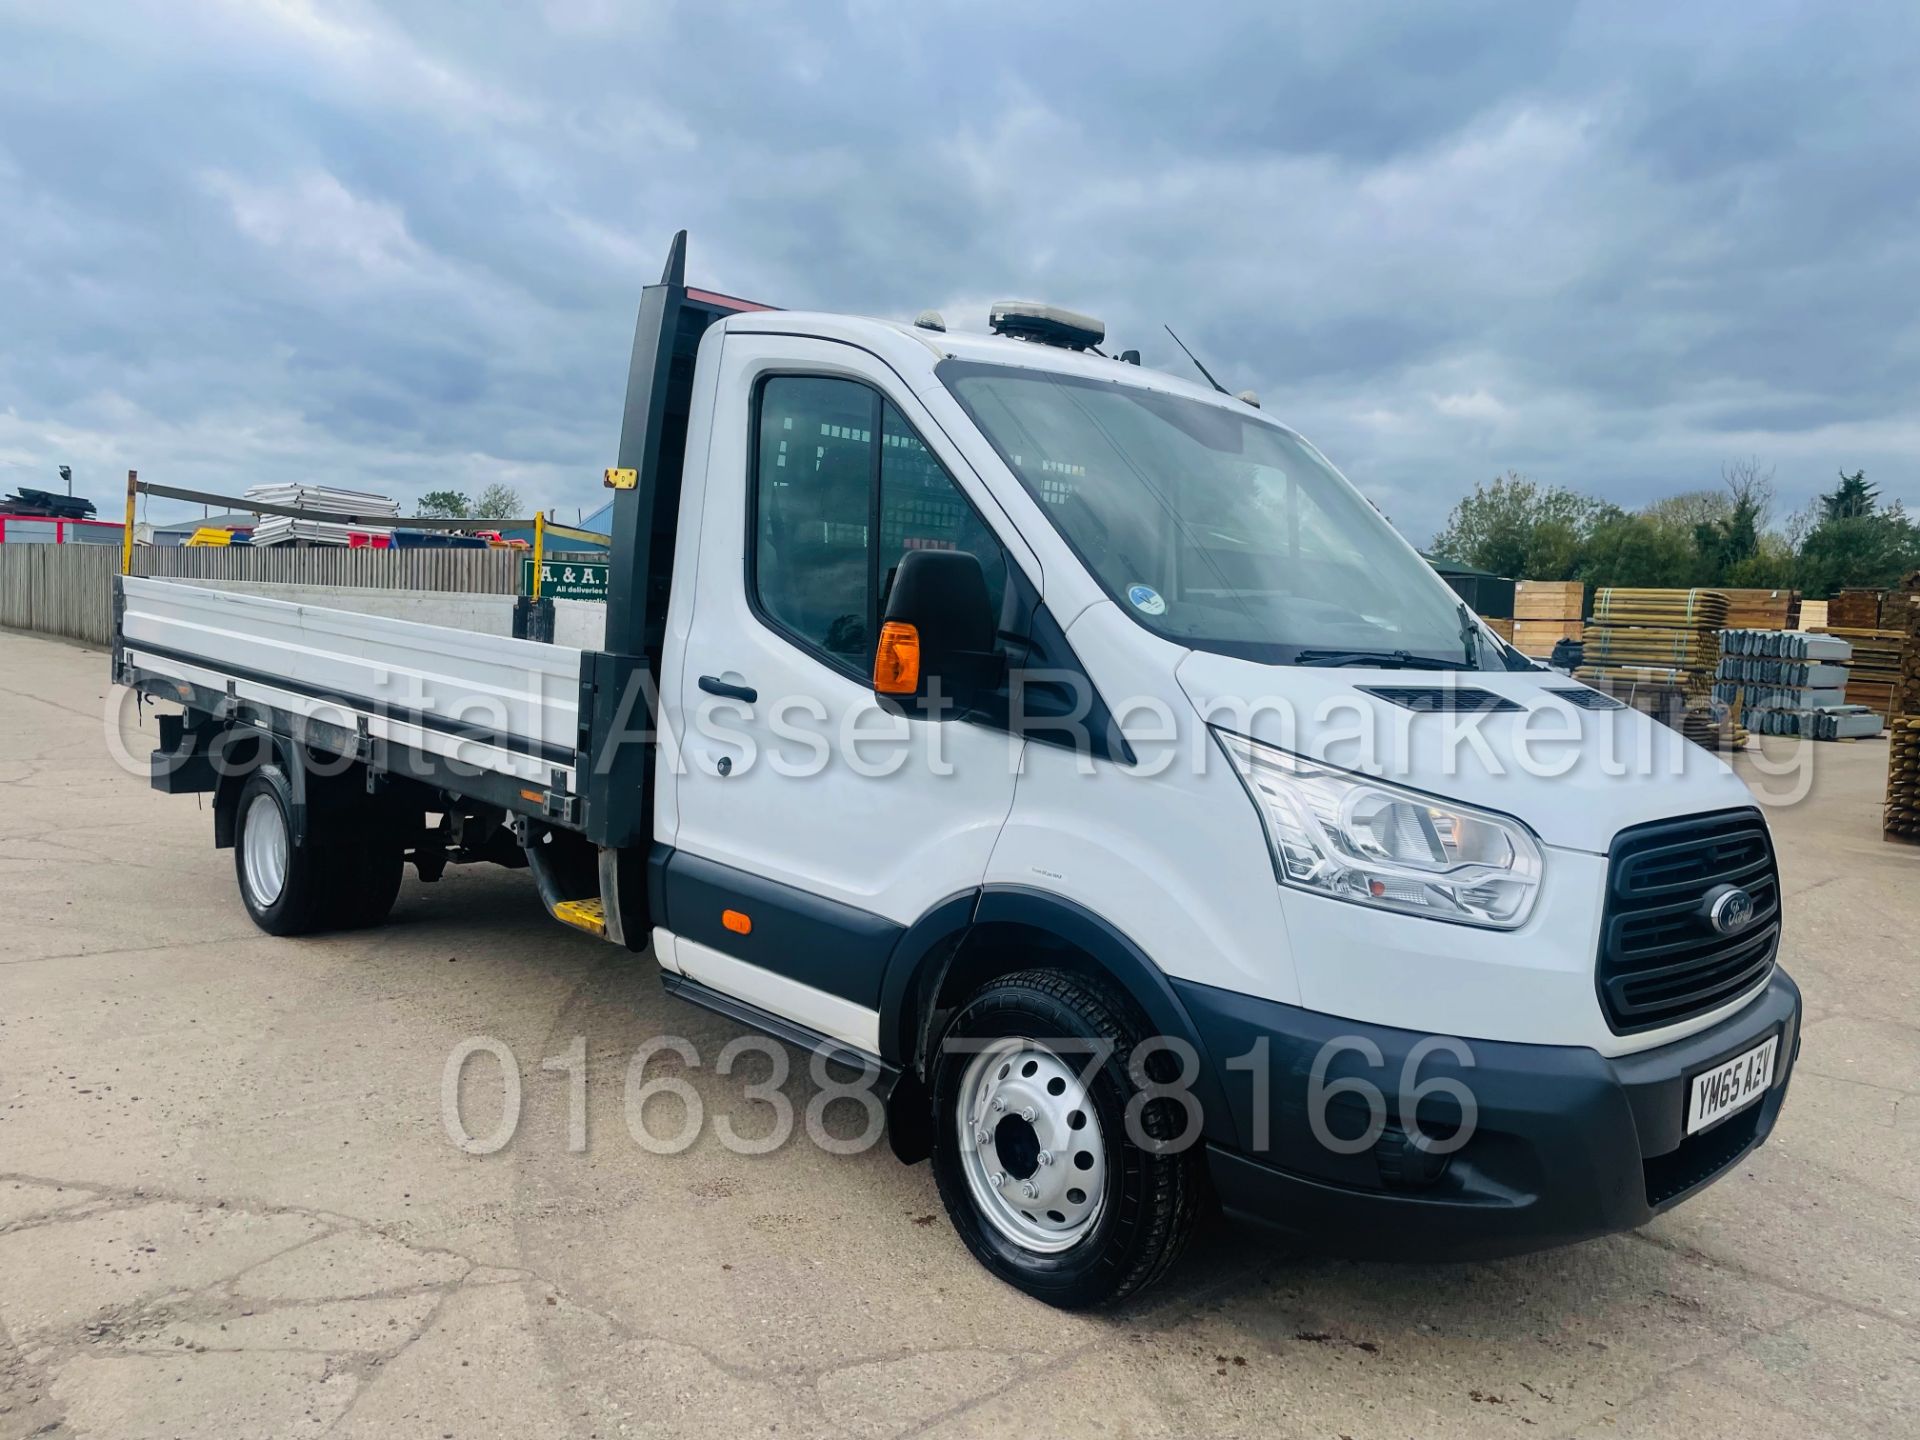 (On Sale) FORD TRANSIT 100 T350 *LWB - DROPSIDE TRUCK* (2016 - NEW MODEL) '2.2 TDCI - 6 SPEED' - Image 3 of 37